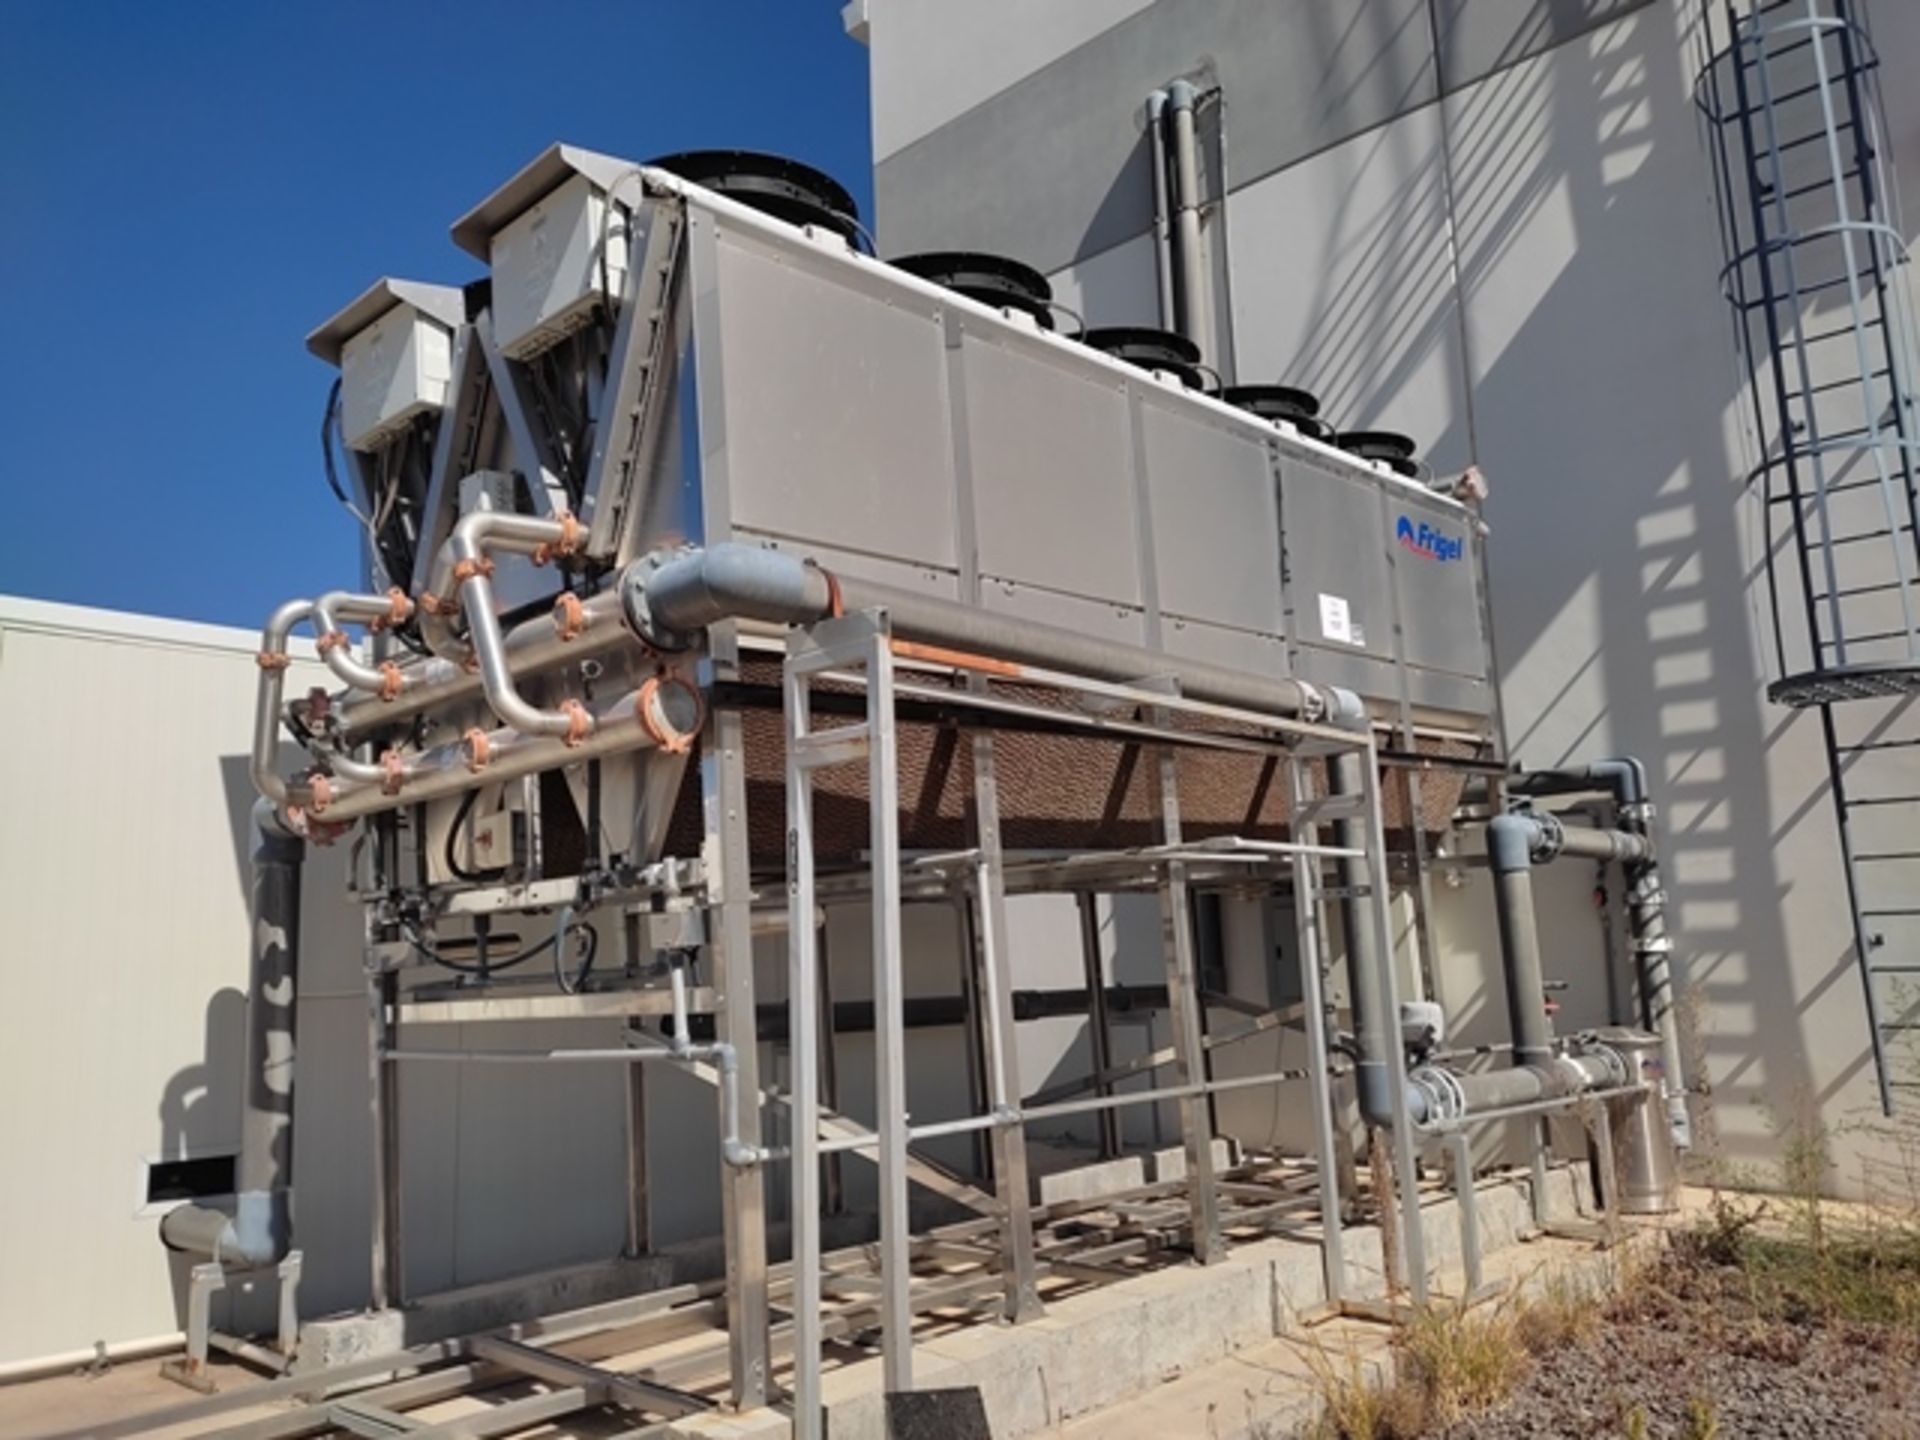 Frigel Ecodry 3DK 52 DS EZ +84 Cooling Tower, Serial: 1610113T; Year: 2016 - Image 5 of 9